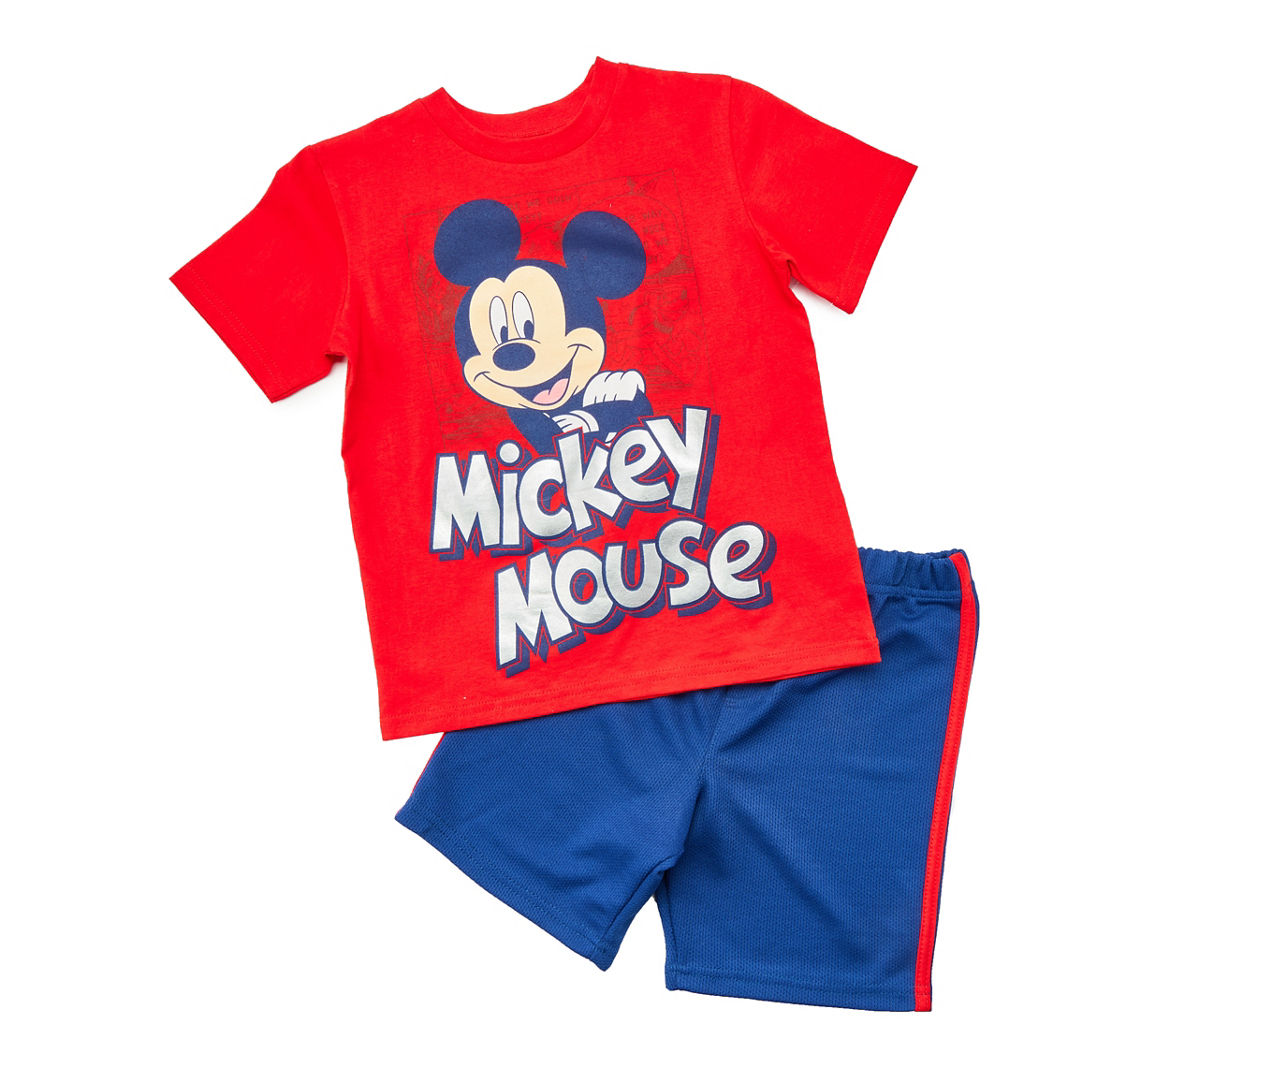 Kids' Size 5/6 "Mickey Mouse" Red Tee & Blue Side-Stripe Shorts